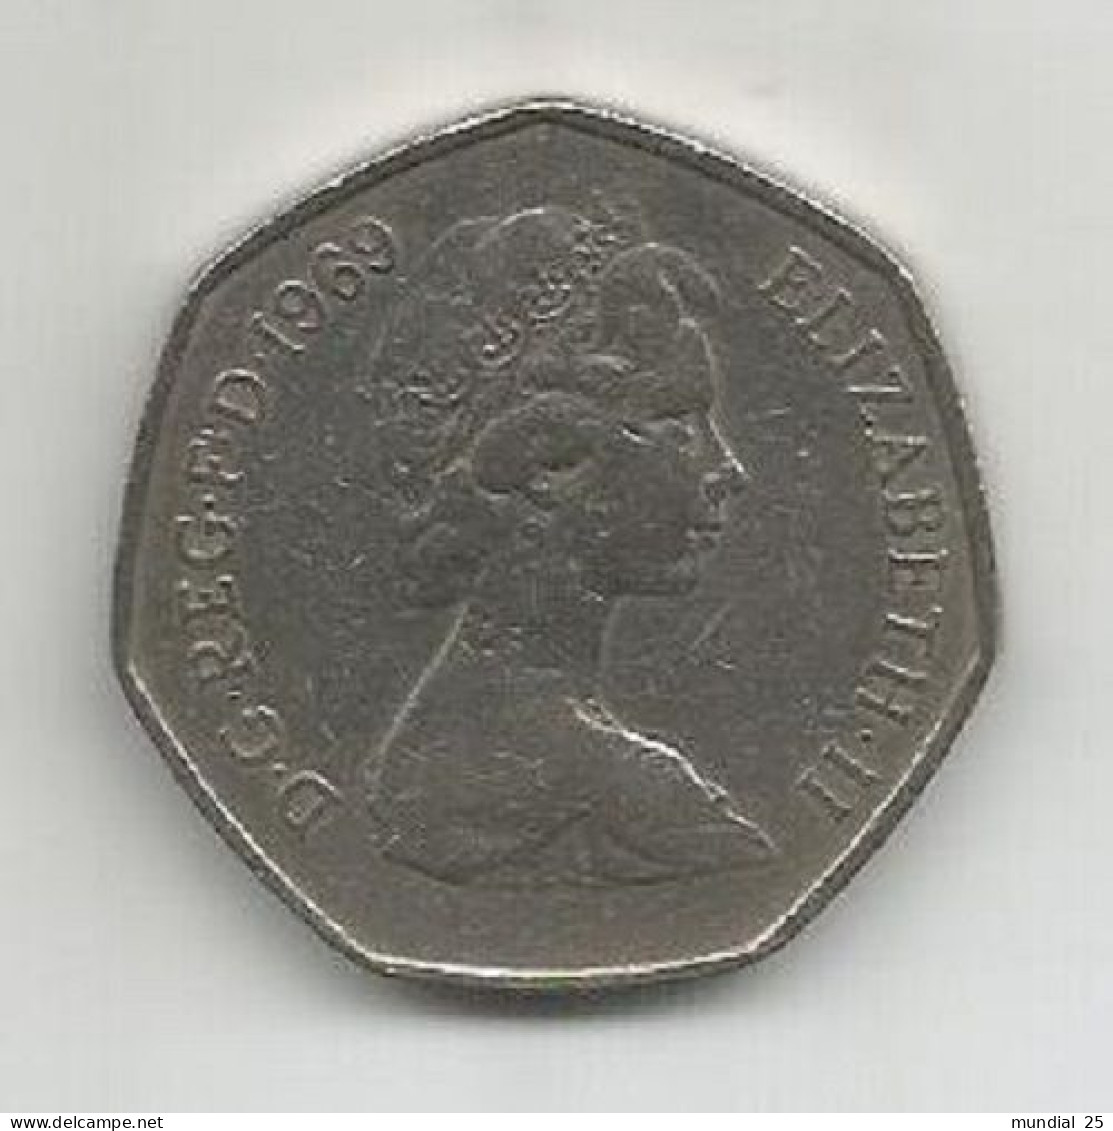 GREAT BRITAIN 50 NEW PENCE 1969 - 50 Pence